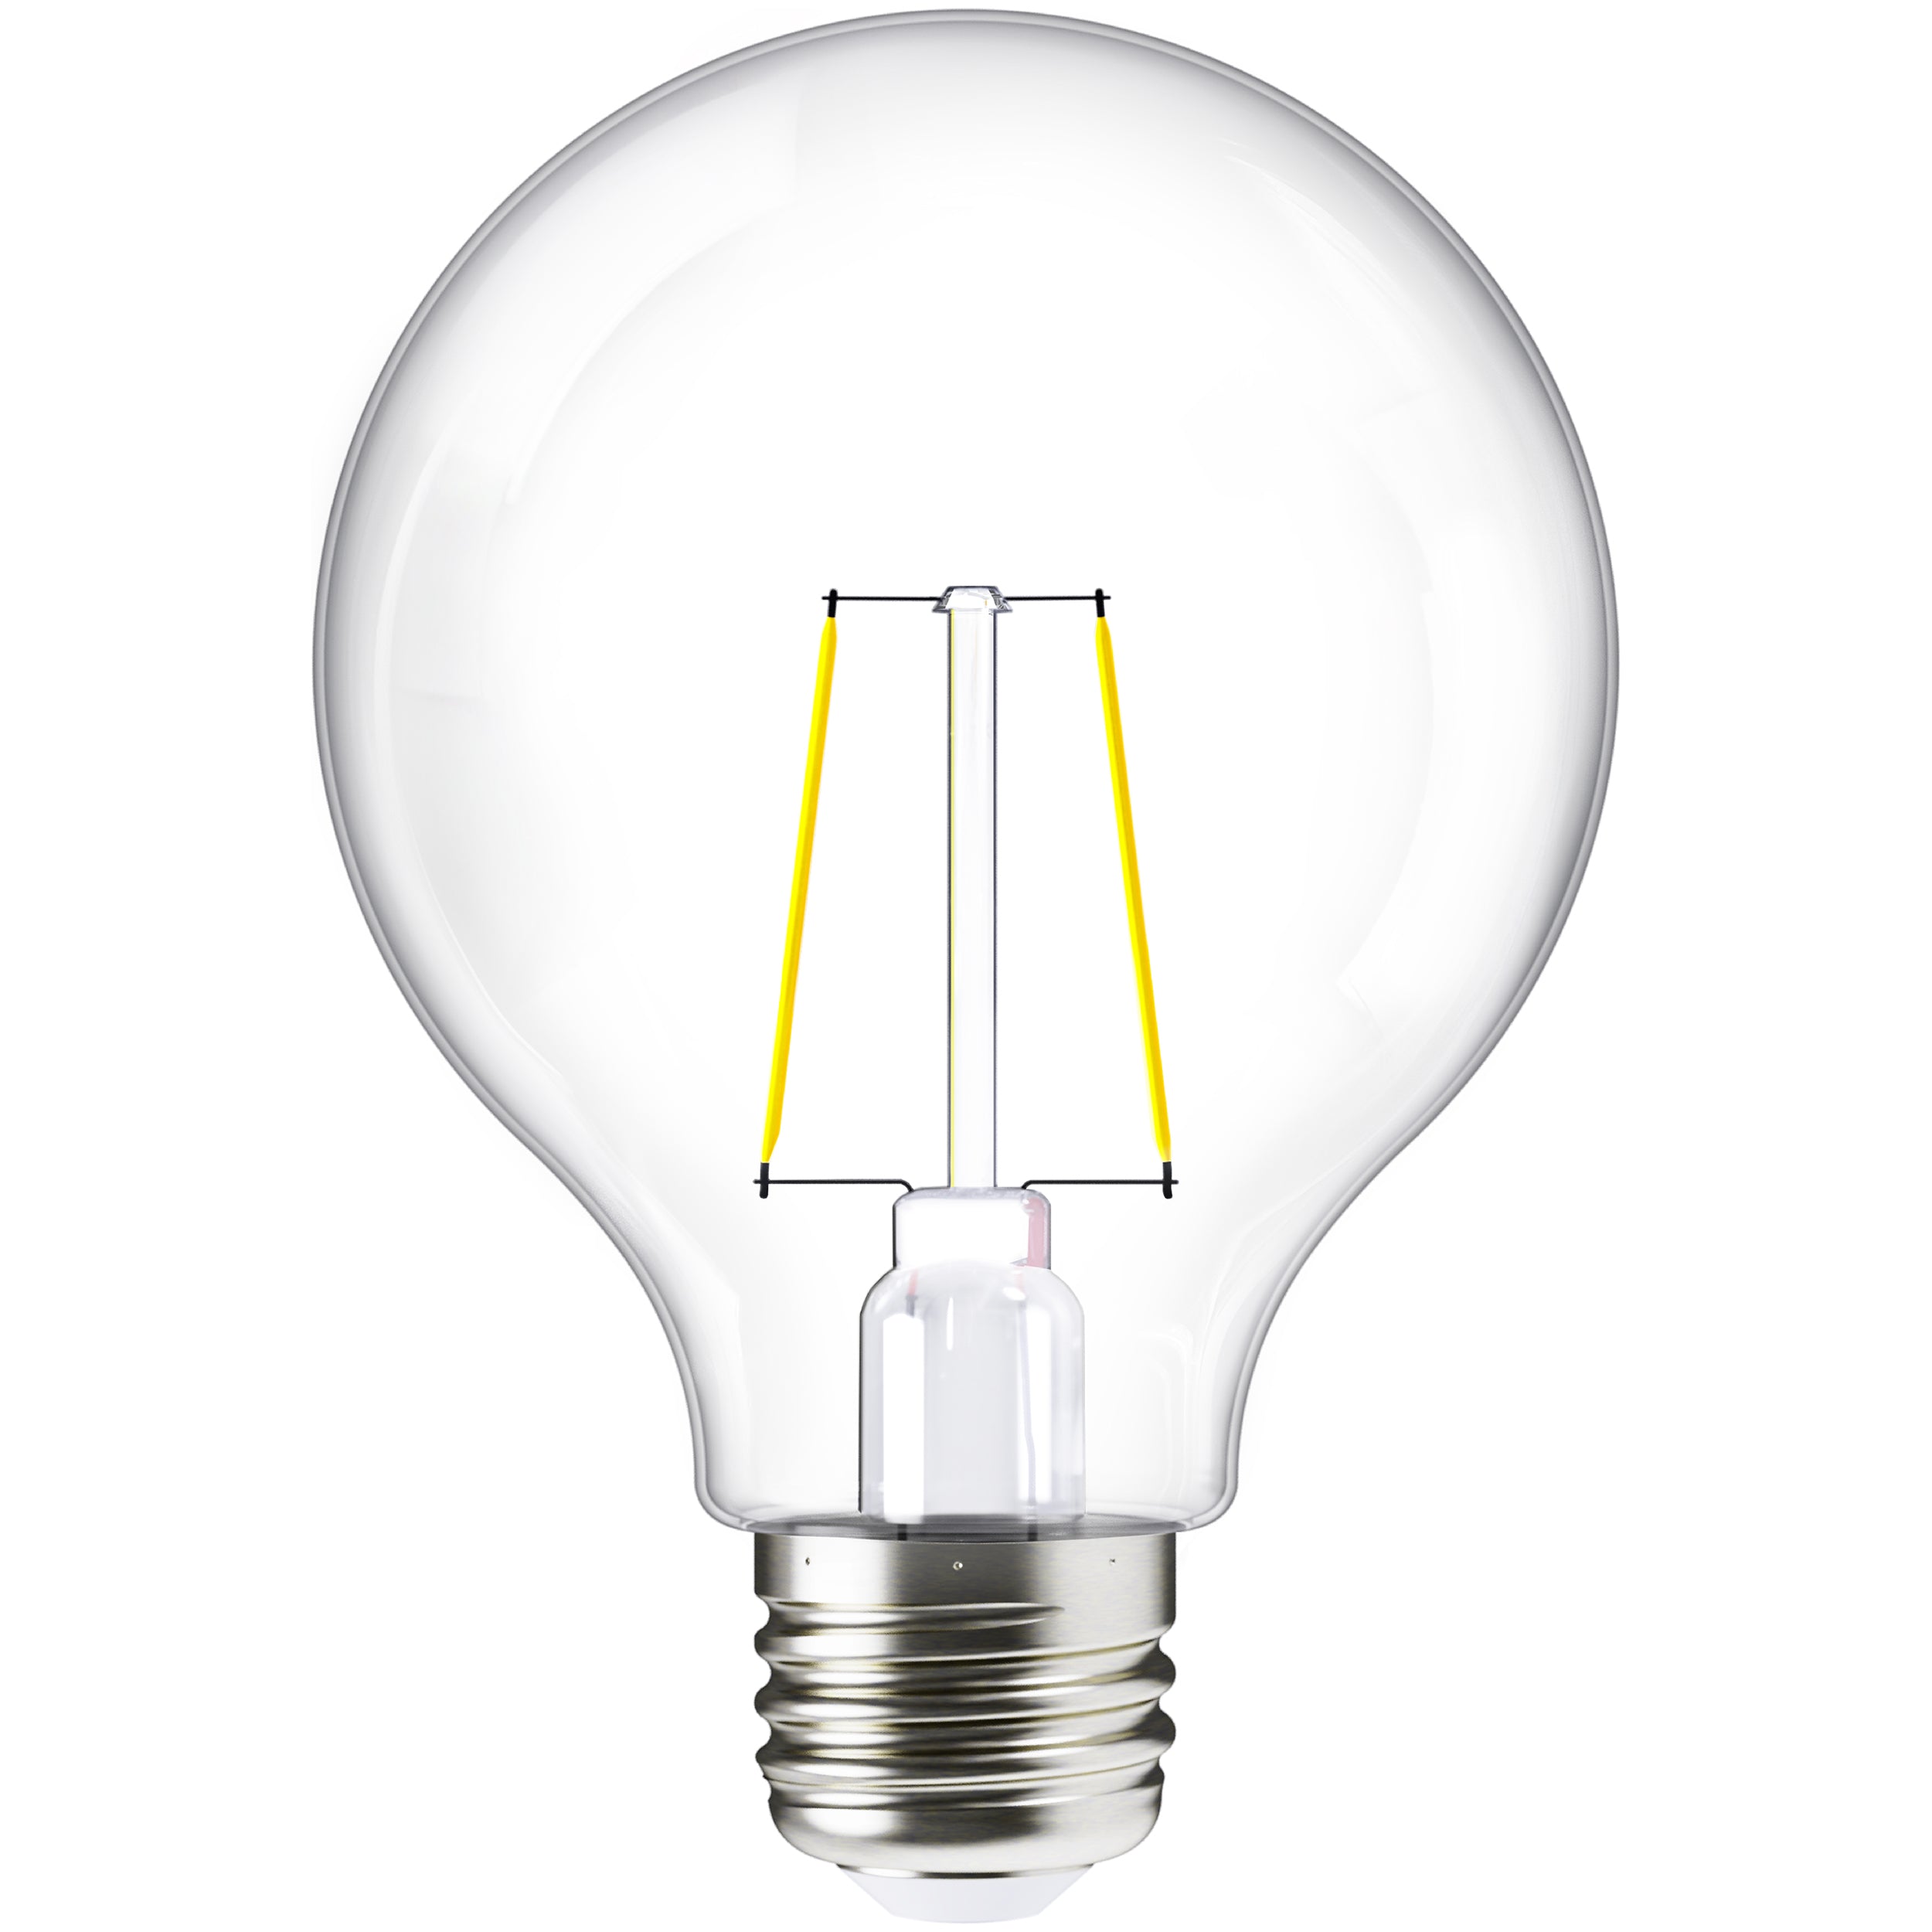 Create the popular vintage look of an Edison style glass filament bulb with our instant on G25 LED Filament. This dimmable bulb is shown here with the light bulb off to see the high tech LED filament inside the glass housing. This light fixture offers retro styling in chandeliers, wall sconces, lanterns, pendant caged fixtures, and string lights. Great for outdoor use since it is IP65 rated (wet rated). Suitable for restaurants and patios, backyards, and for interior lighting in living rooms.